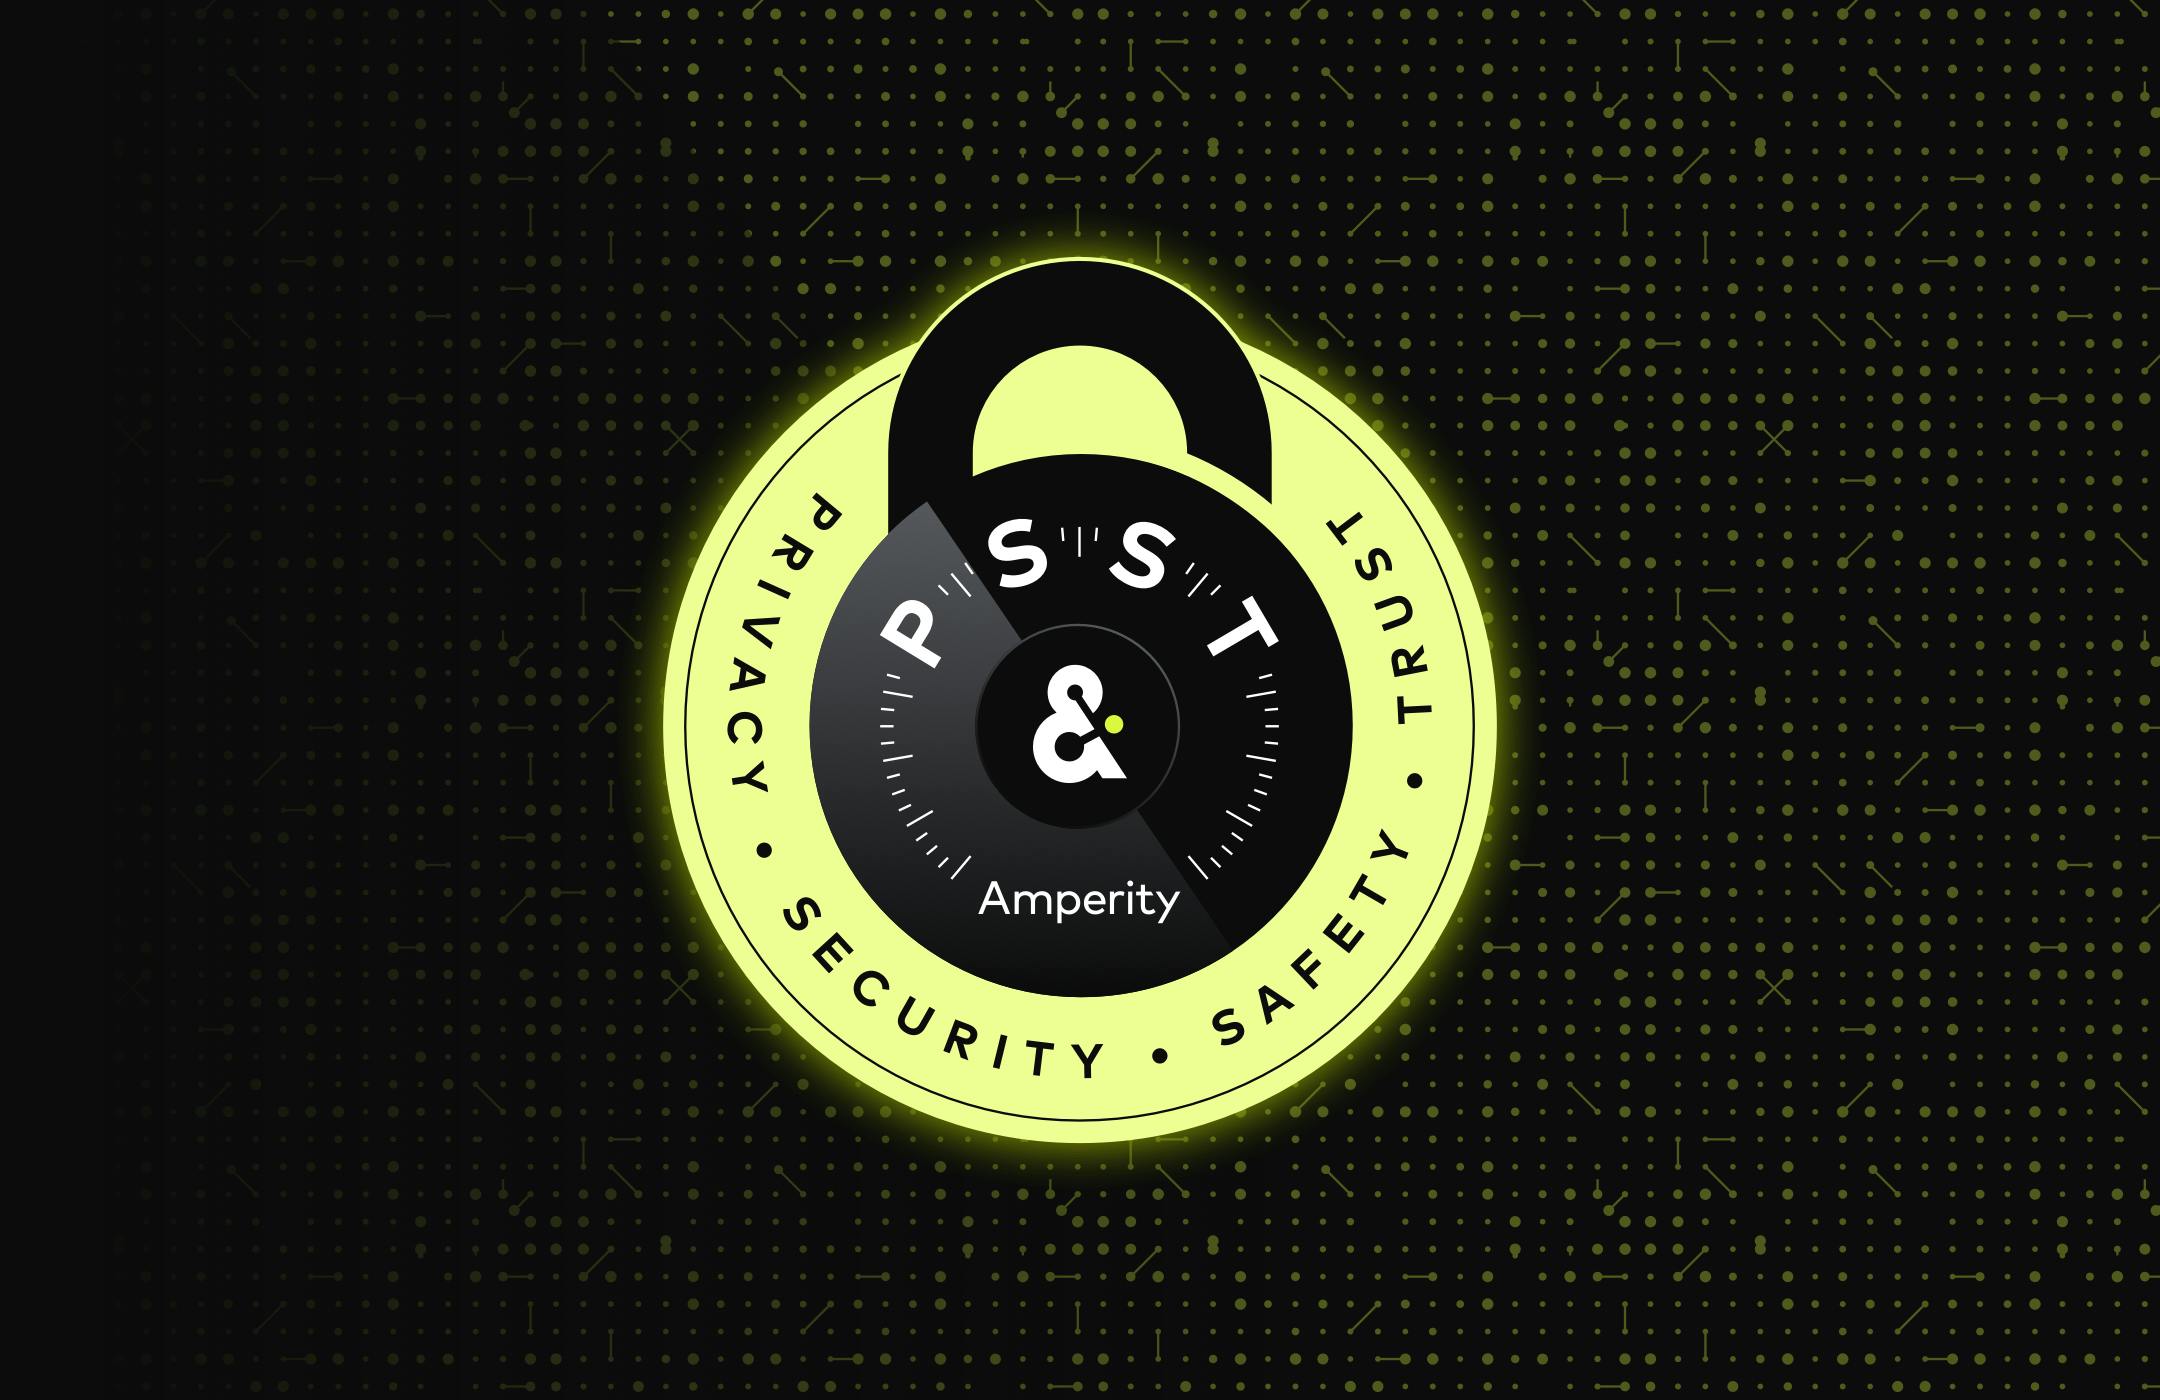 Image of security lock logo that says Privacy, Security, Safety, Trust, PSST & Amperity.